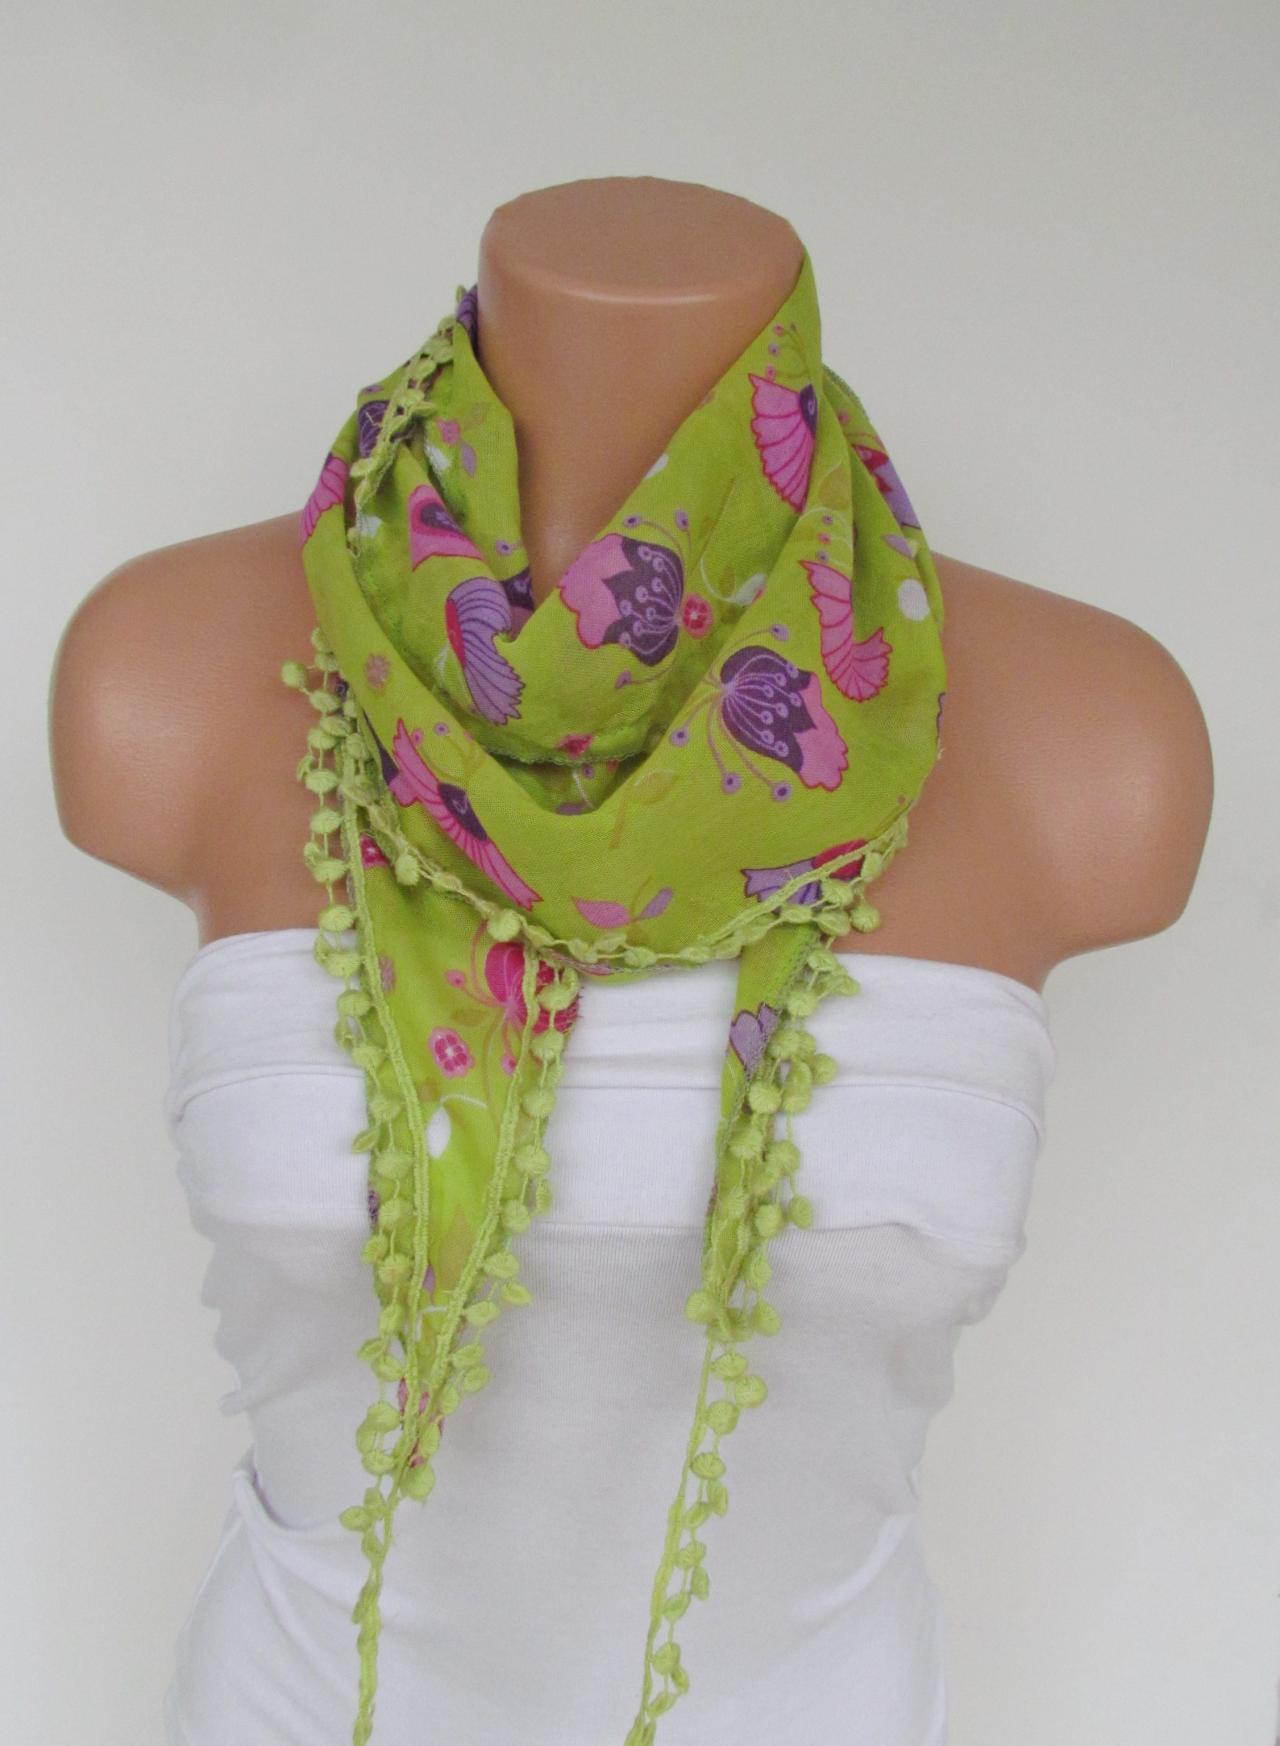 Long Scarf With Fringe-New Season Scarf-Headband-Necklace- Infinity Scarf- Spring Accessory-Floral Green Scarf-New Season-Gift